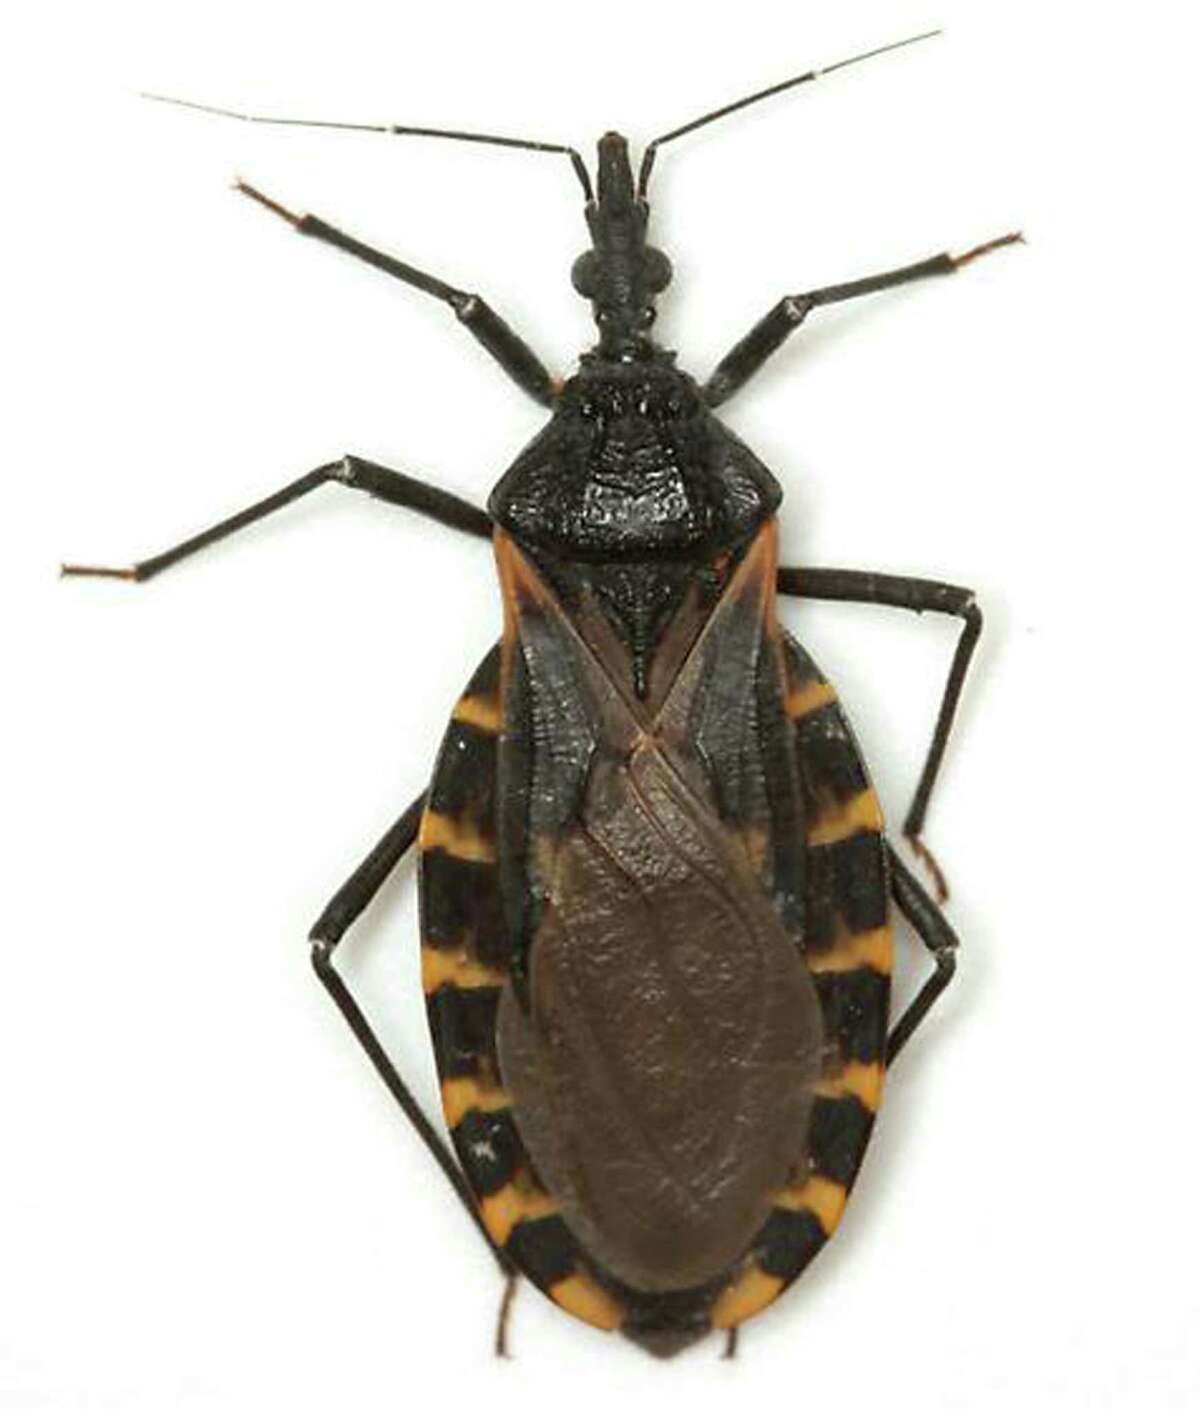 Experts say there has been an increase in the kissing bug population in Texas, potentially putting canines and humans at risk for Chagas.